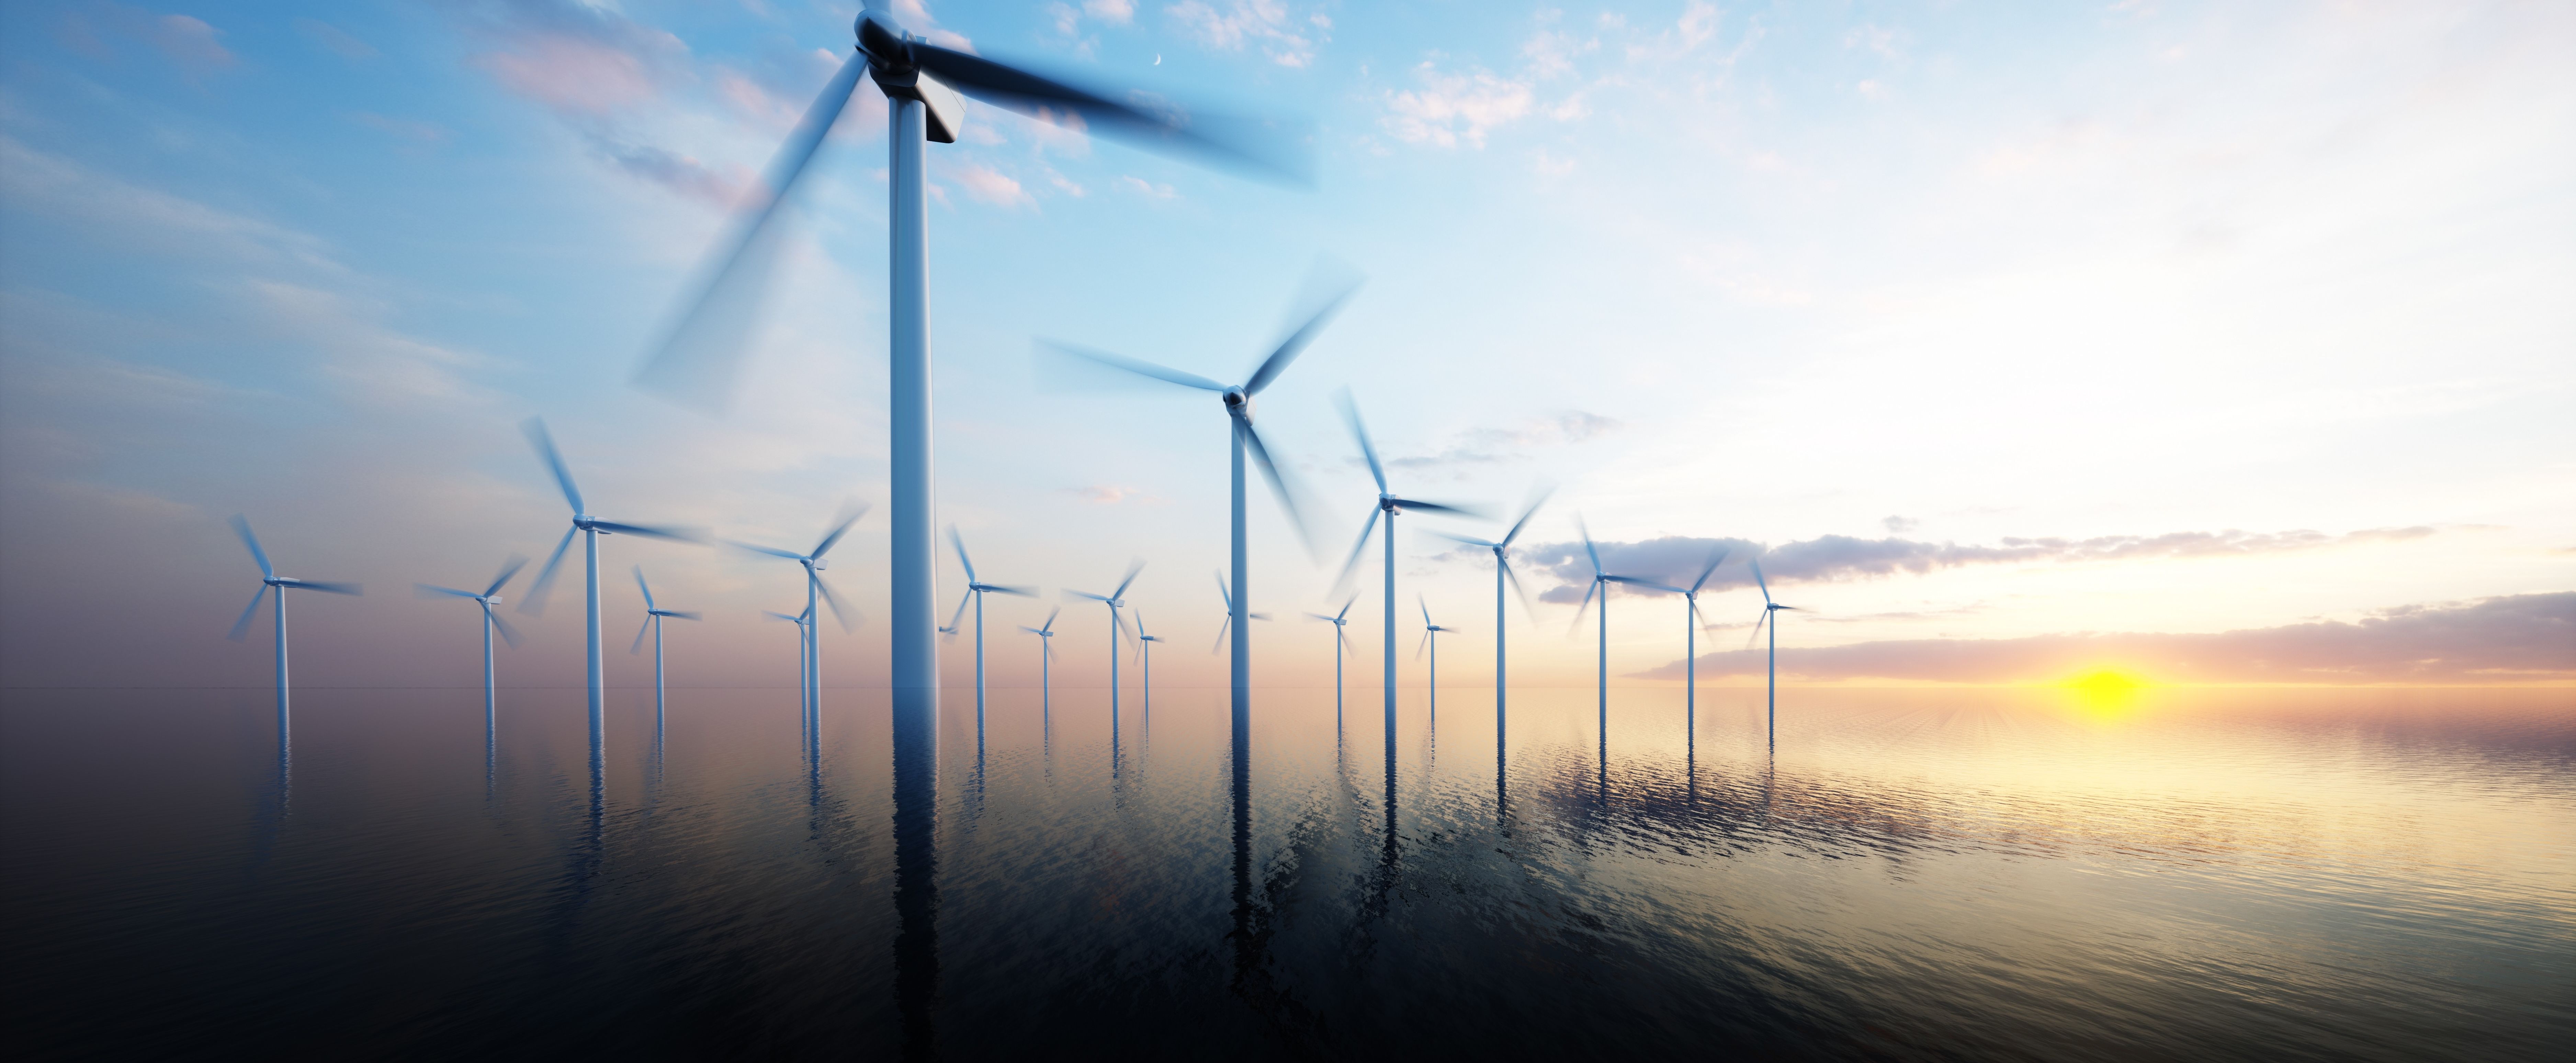 FINANCIAL ADVISORS FOR RENEWABLE ENERGIES AND CLEANTECHS